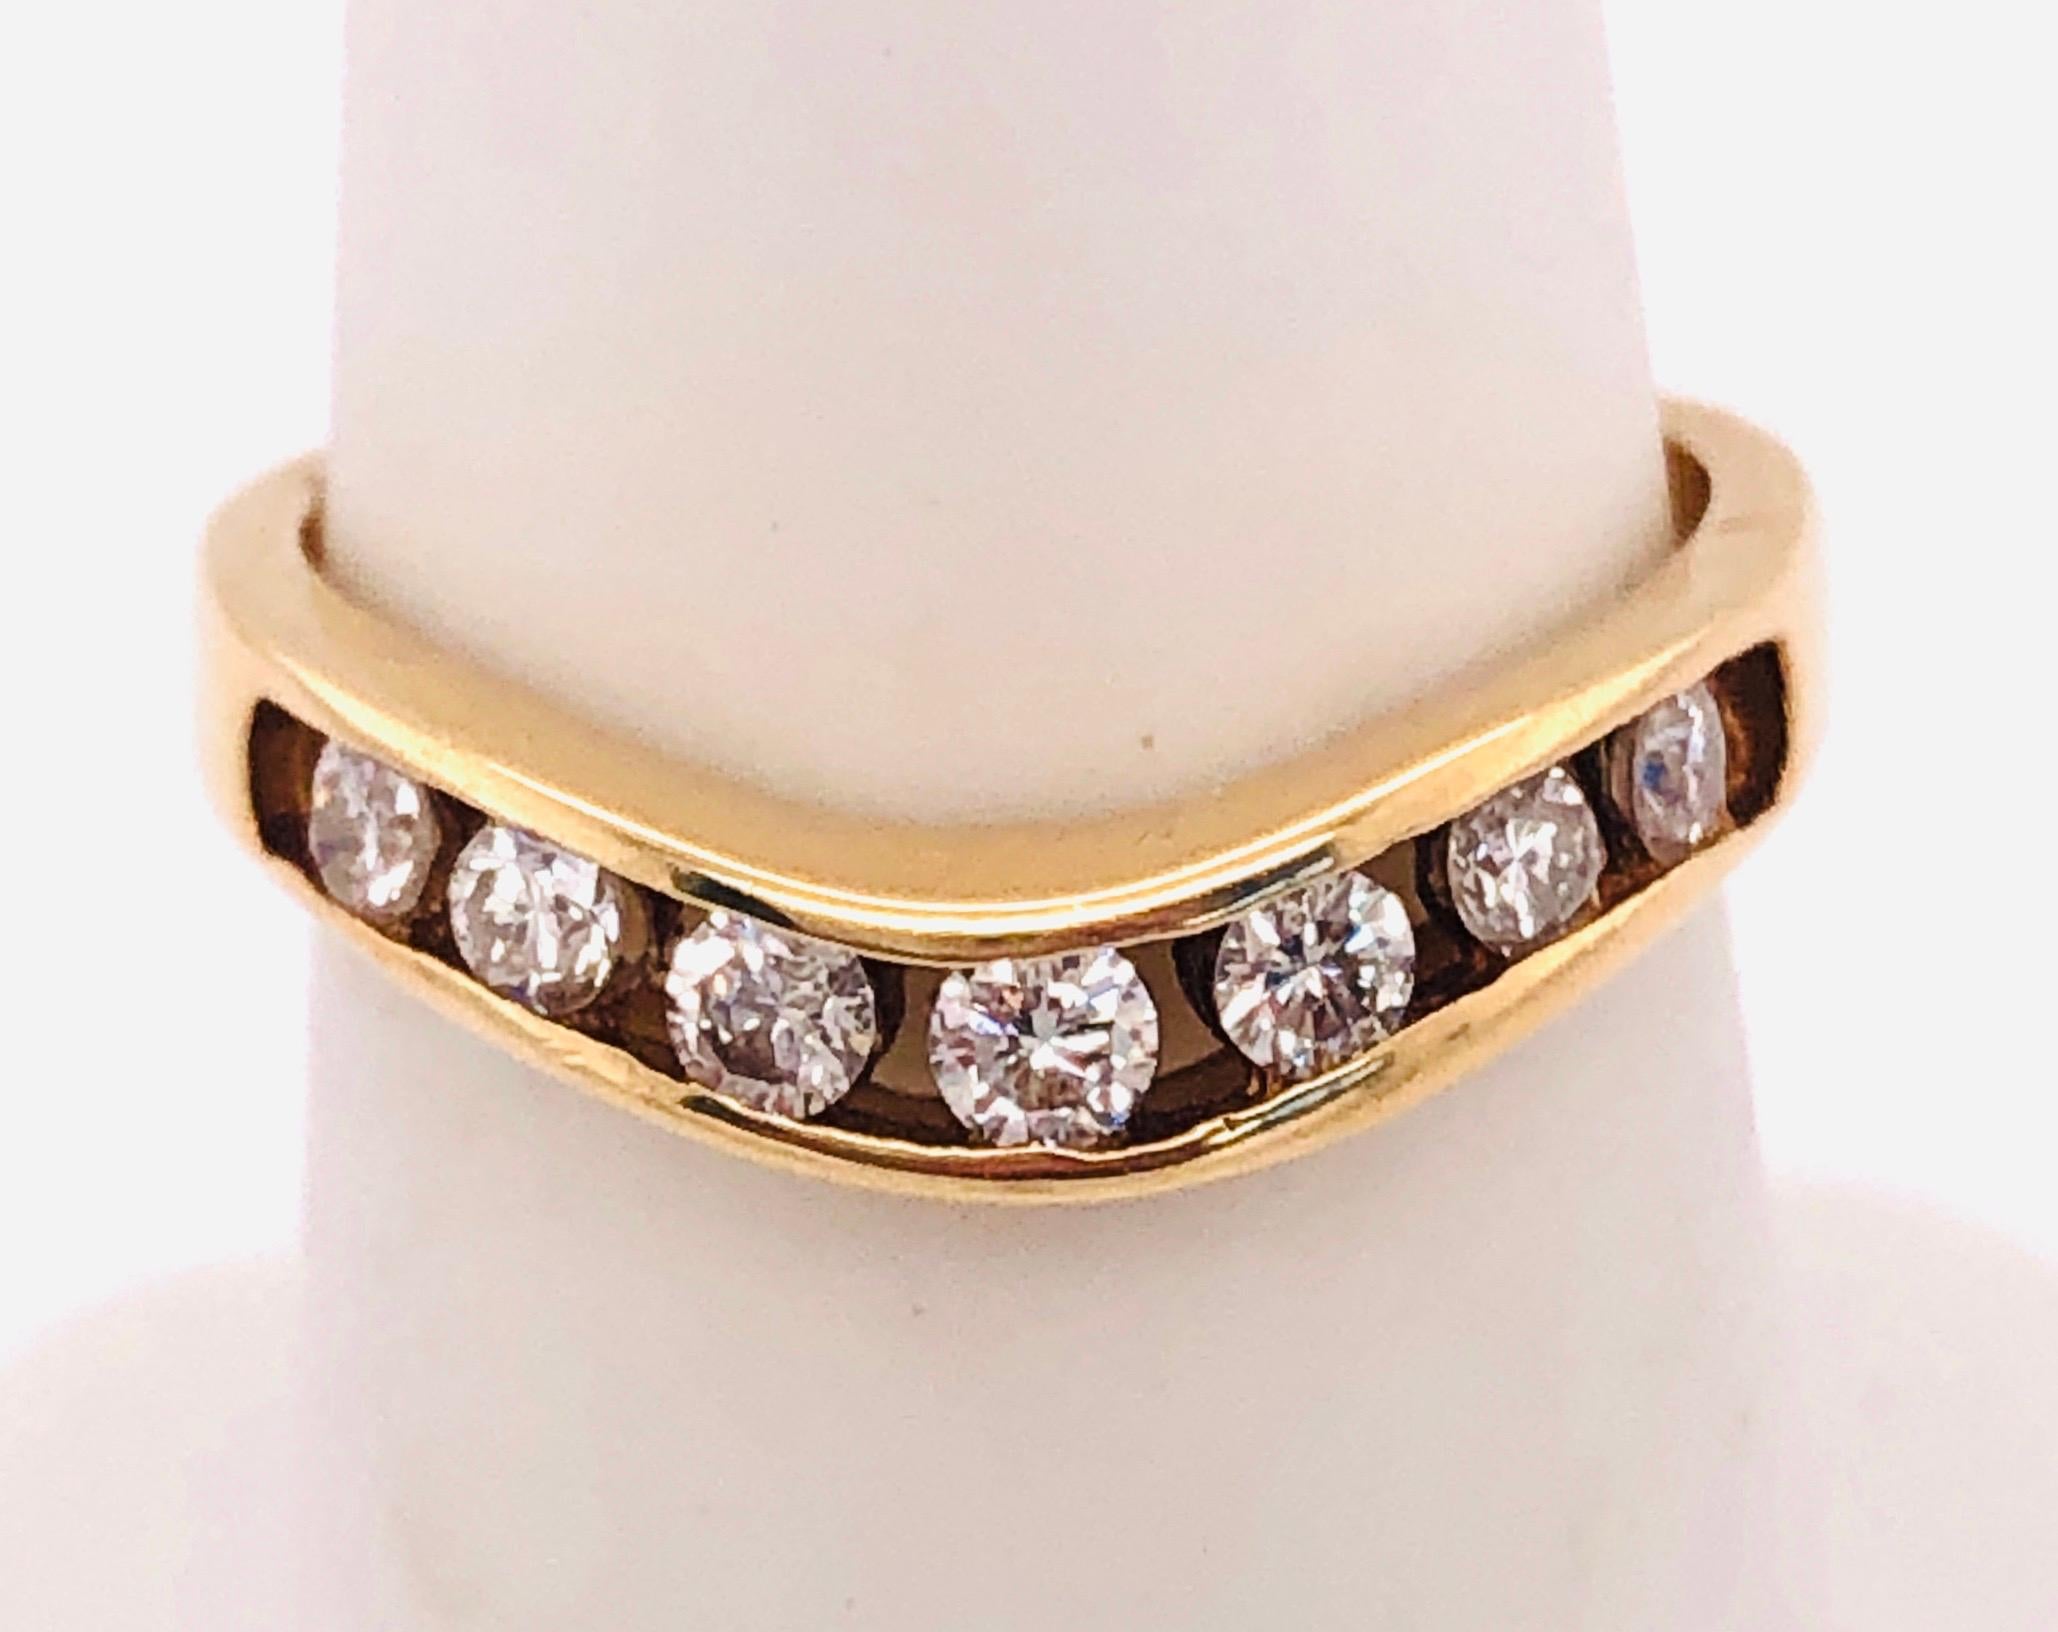 14Kt Yellow Gold Freestyle Ring Bridal Wedding Band 7 Diamonds 0.50 TDW
 Size 6
3 grams total weight.